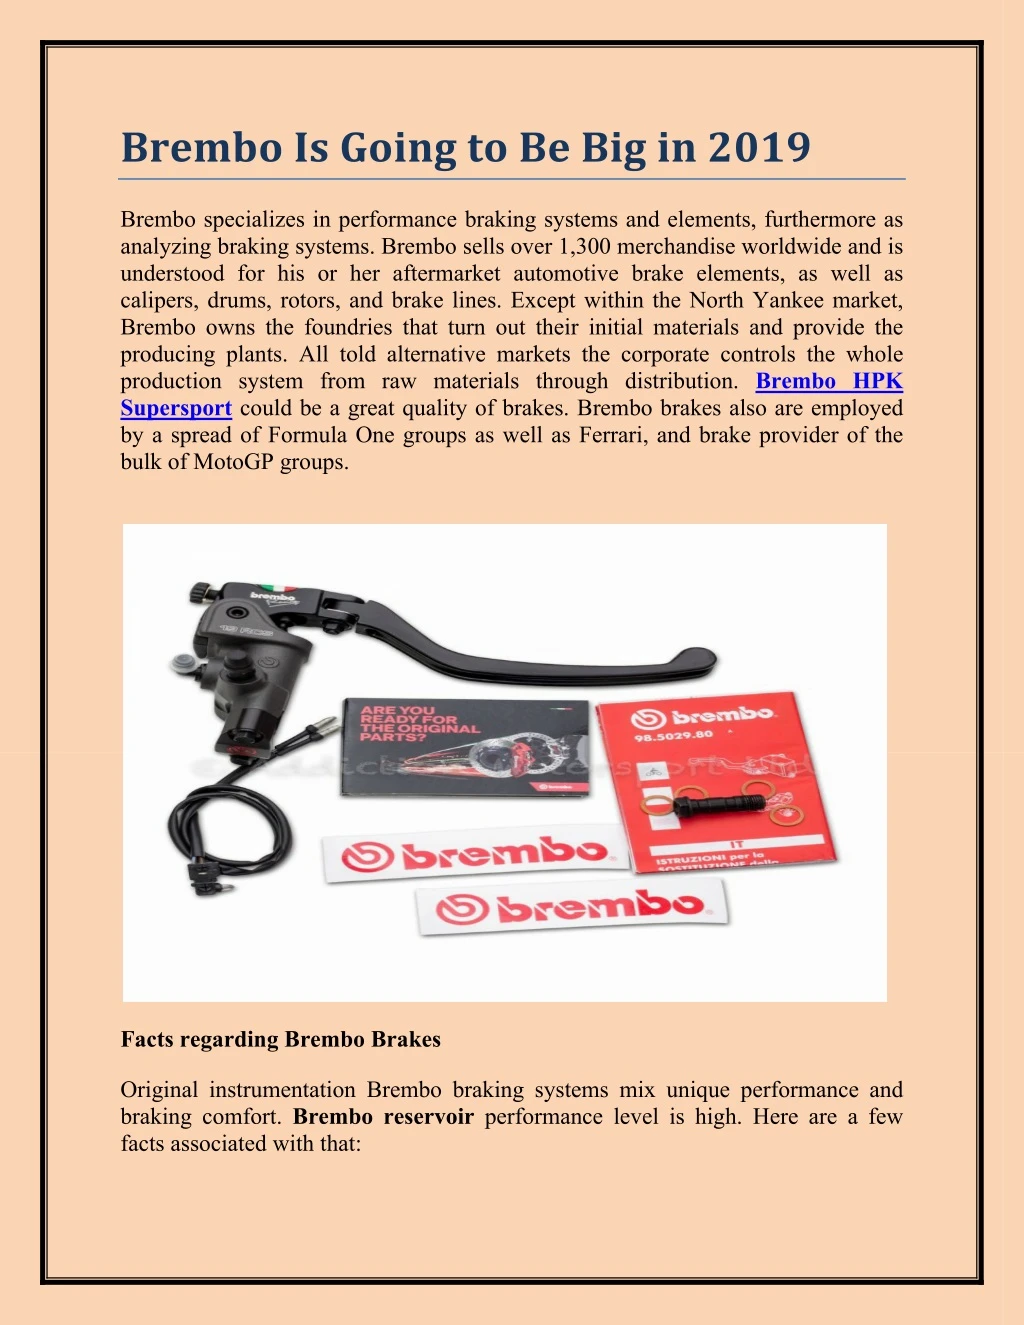 brembo is going to be big in 2019